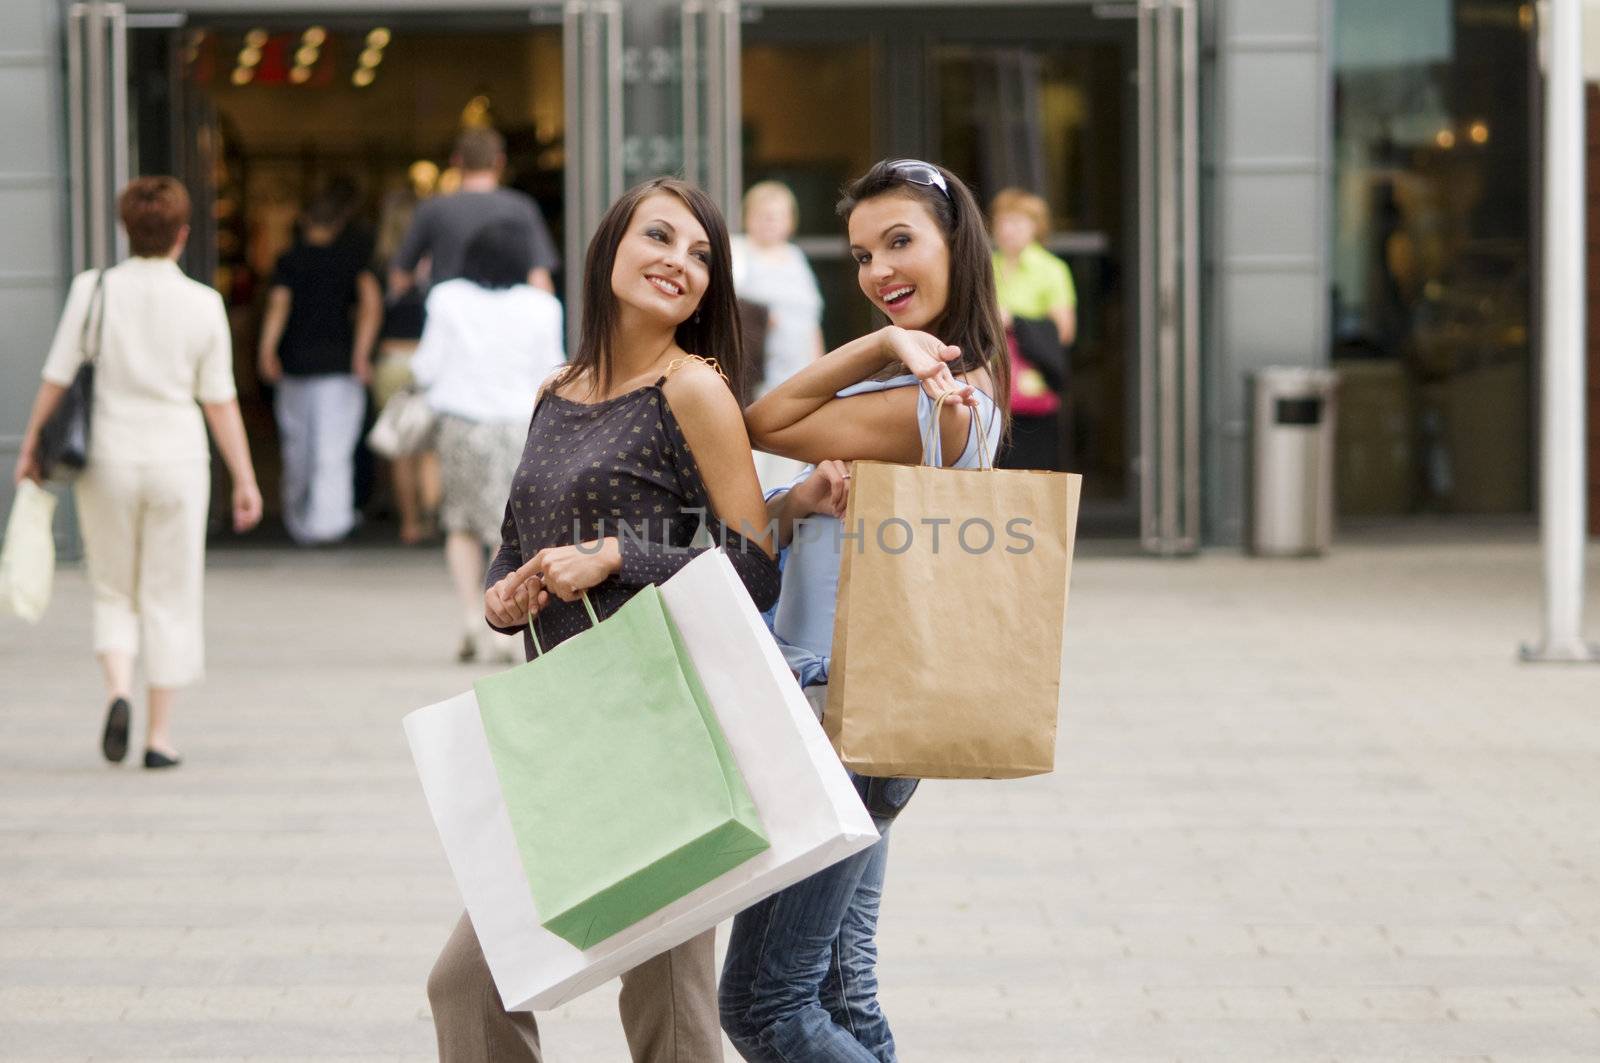 two girls just outside of commercial center with her purchases in bags